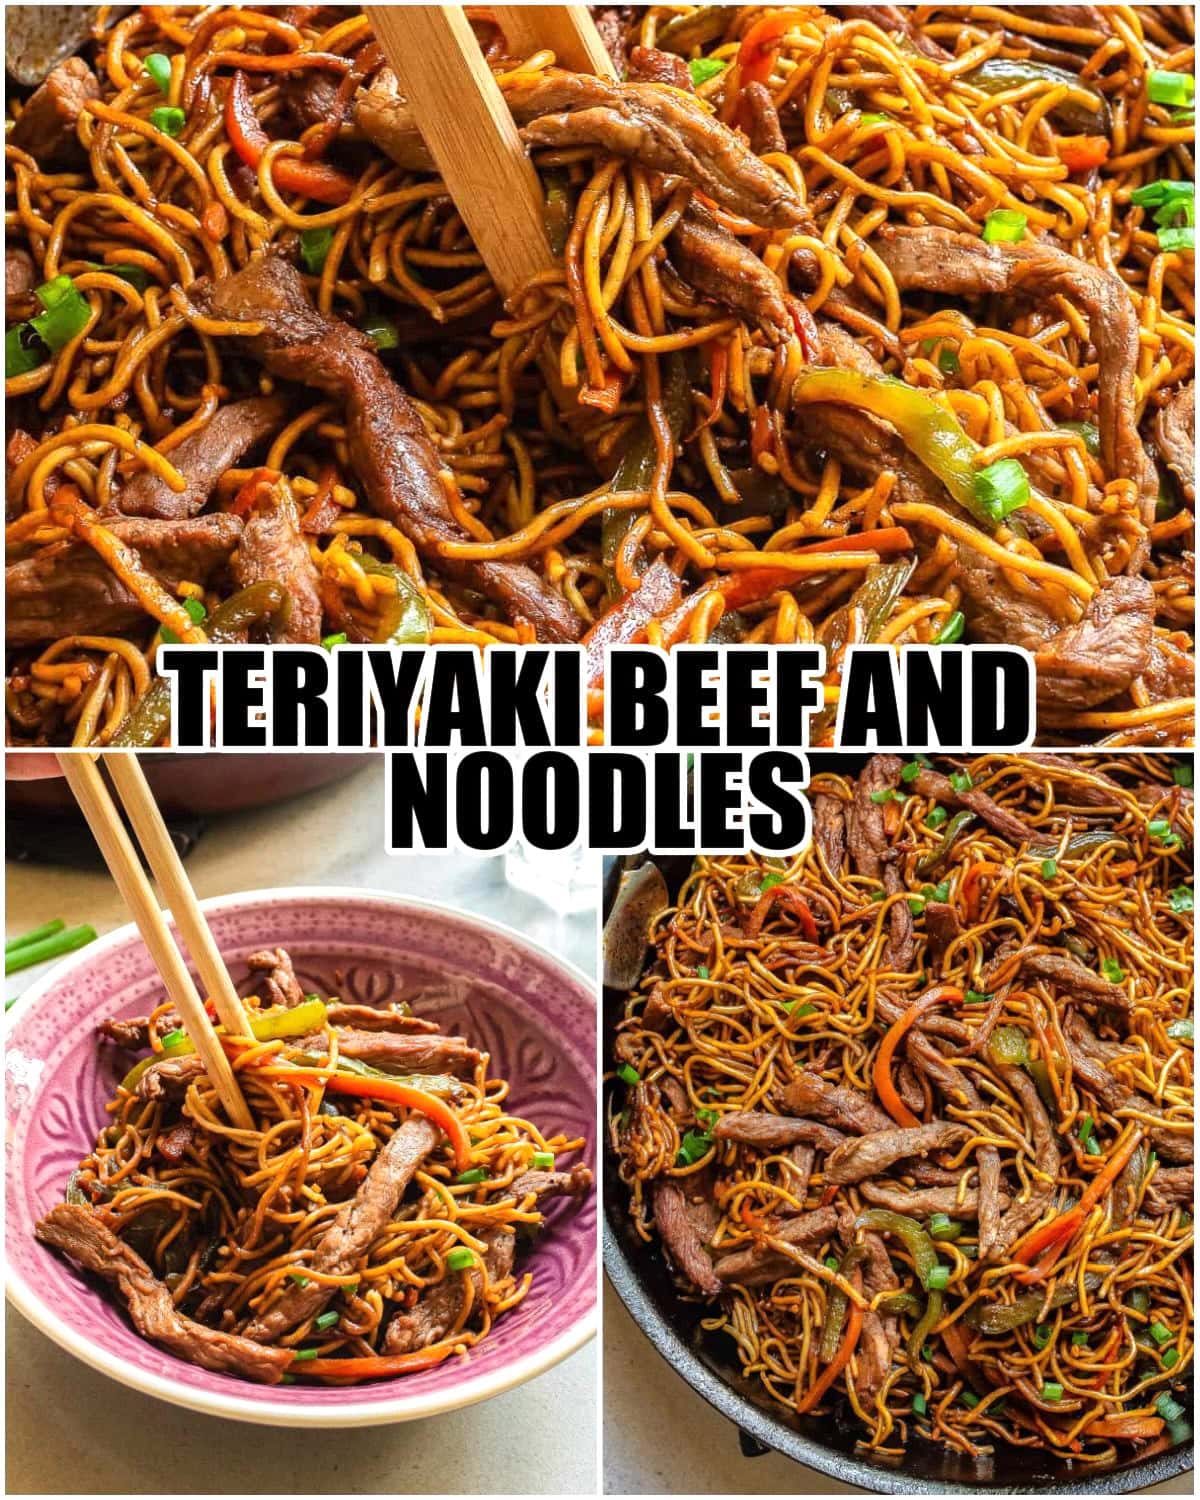 Collage of three images showing teriyaki beef and noodles; top image close-up with chopsticks, bottom left in a bowl, bottom right in a pan, all garnished with green onions.